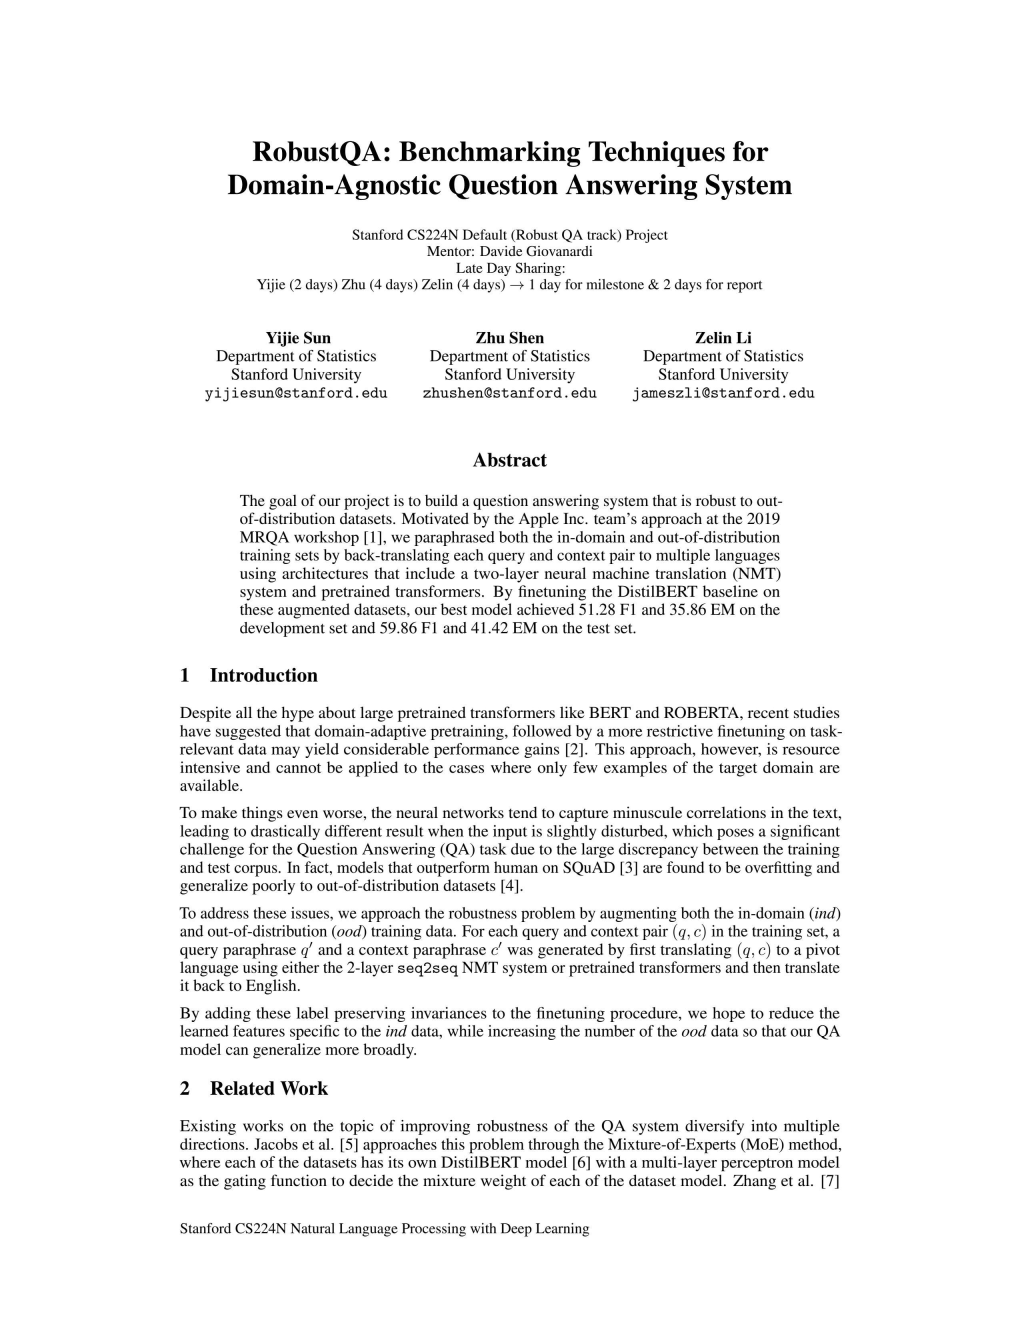 Robustqa: Benchmarking Techniques for Domain-Agnostic Question Answering System